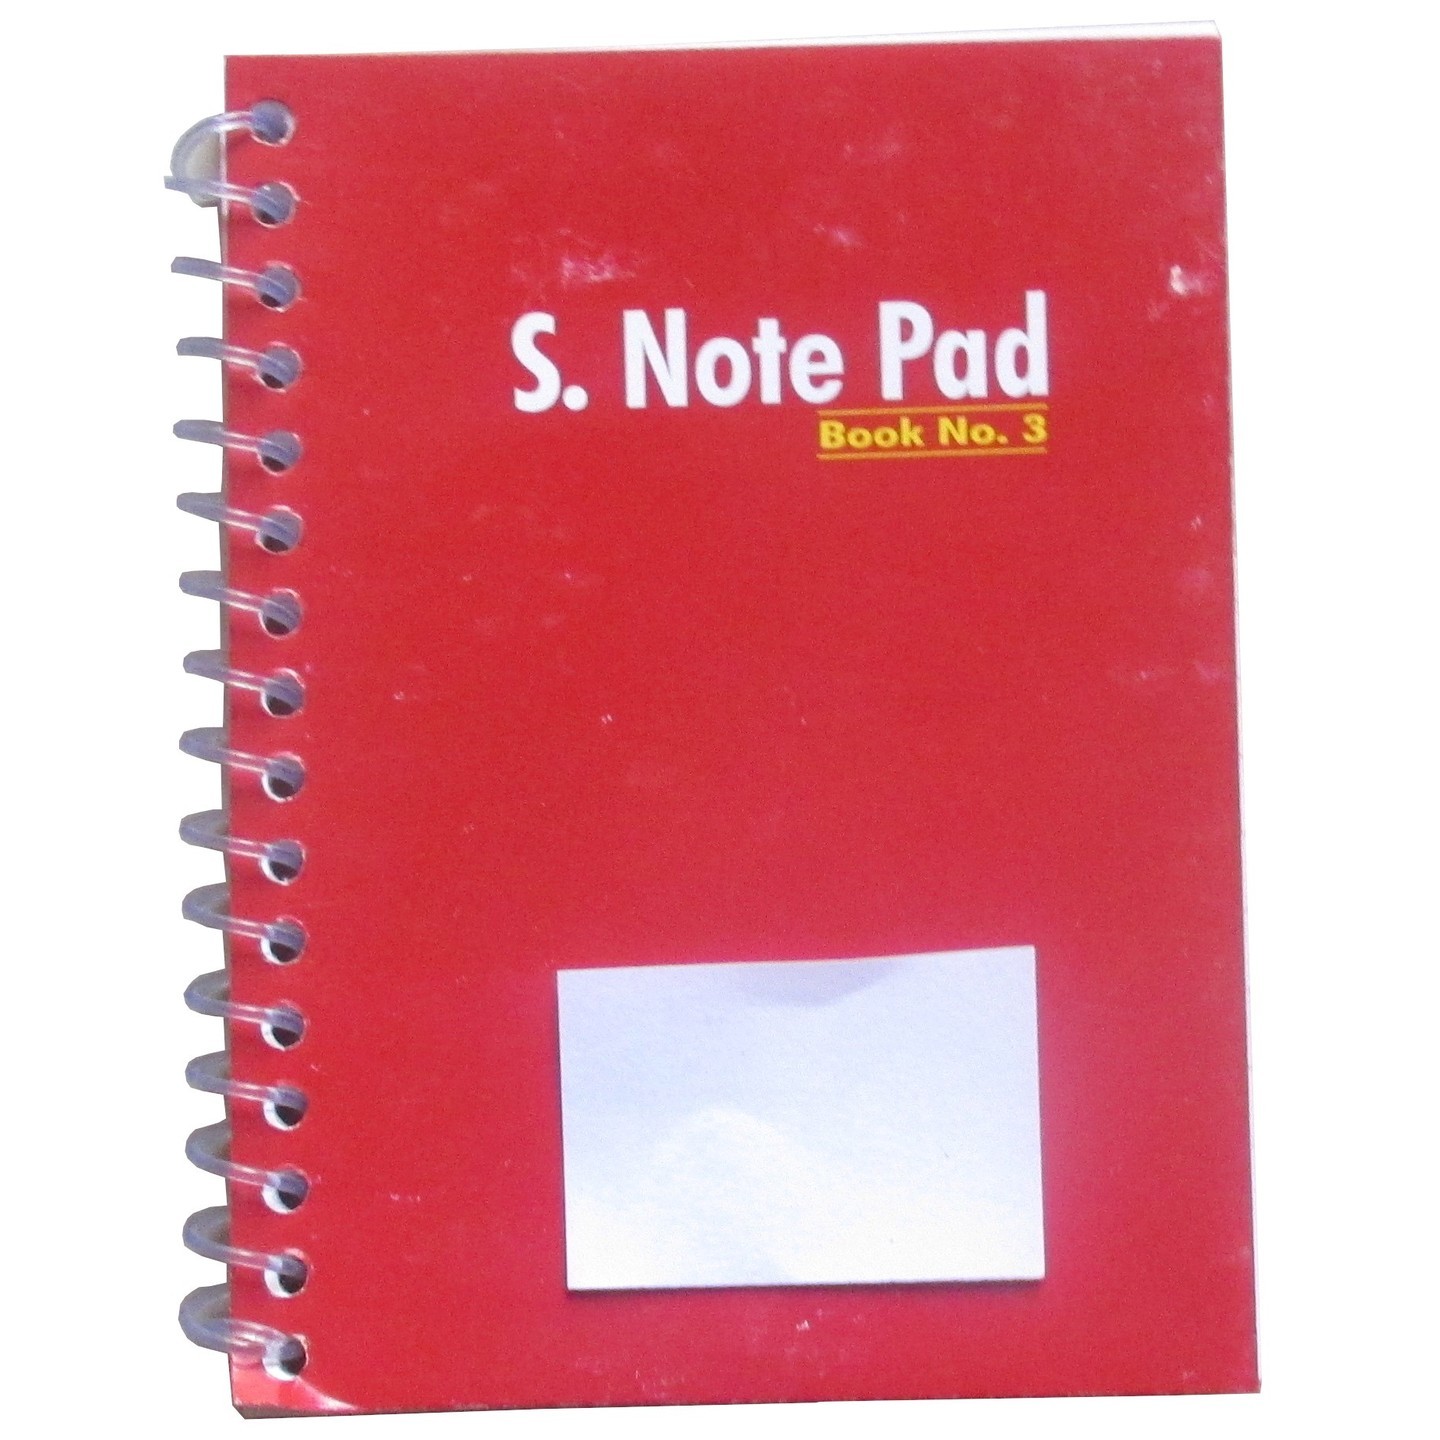 Handy, Small, Spiral, Ruled, Note Pad 140 Pages - Pack of 5